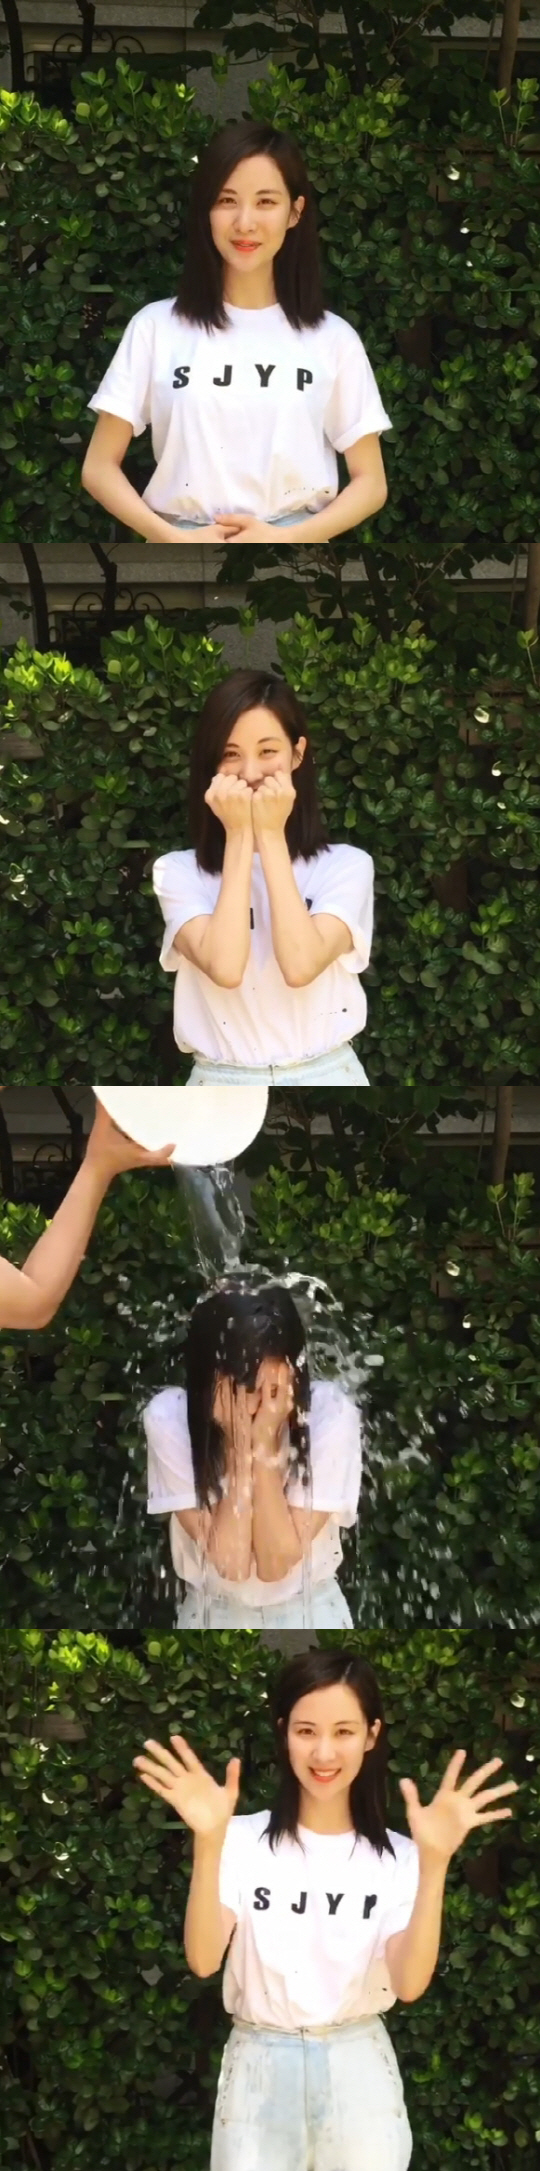 Singer and actor Seohyun joined the 2018 Ice bucket challenge.Seohyun posted a top model video of 2018 Ice bucket challenge on his instagram on the 1st.In the video, Seohyun said, I was together as a spot of 2018 Ice bucket challenge Sooyoung sister.I am glad and meaningful to be able to do such a good thing, he said. I hope that more people will be interested and cheered for the Lugeric people. Seohyun then joined the Ice bucket challenge by overturning ice water.Seohyun also pointed out the actors Kim Jung-hyun and Hwang Seung-eon who are shooting together Girls Generation Hyoyeon and MBC new drama Time as next runners.The Ice bucket challenge joined by Seohyun was first launched in the United States in 2014 to raise interest in Lou Gehrigs disease and to raise donations.The movement, which shares the video of the ice water, spread to the world on SNS.Ice bucket challenge is a way for participants to point out three next runners, accept this Top Model within 24 hours, turn over ice water, or donate $ 100 to the Seungil Hope Foundation to build a Lou Gehrig Nursing Hospital.On the 29th, Sean announced the first start of Ice bucket challenge, followed by Park Bo-gum, Daniel Henney, Sooyoung, Park Narae and Kwak Dong-yeon.